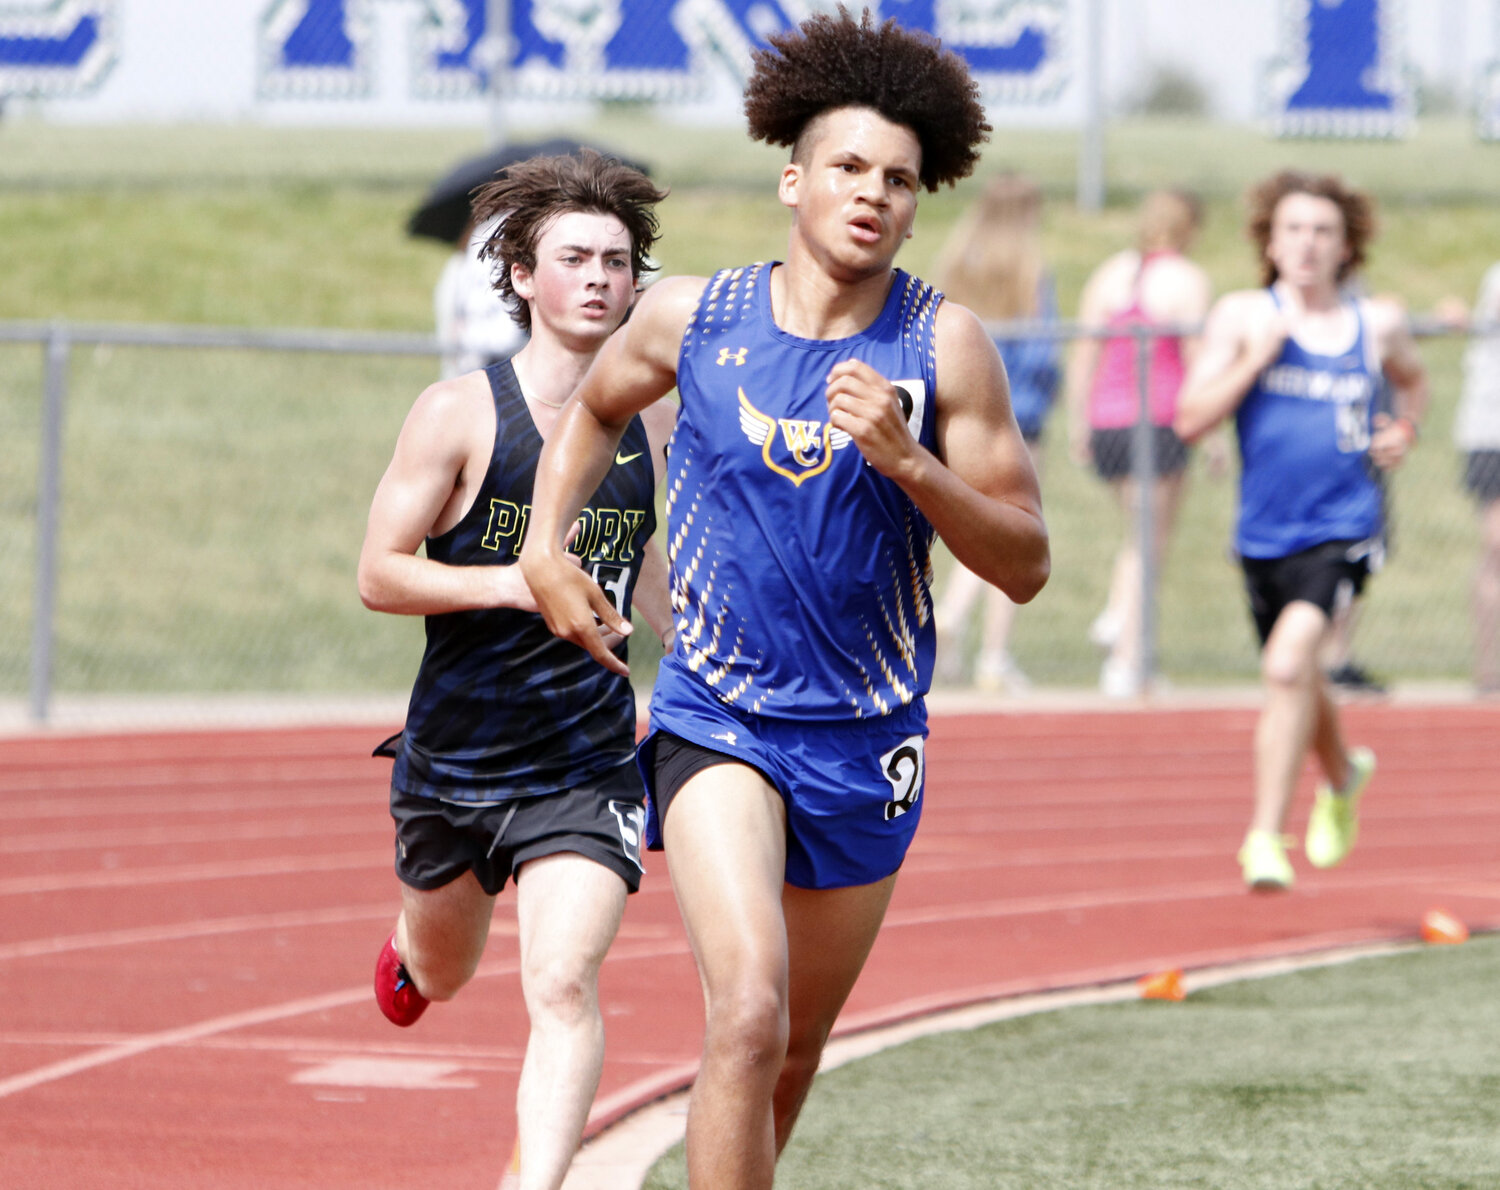 Isaiah Yoder (right) leads a pack of runners during the 1600-meter run at last weekend’s district competition. Yoder will compete in the 1600-meter run and 3200-meter run at this weekend’s sectional meet.